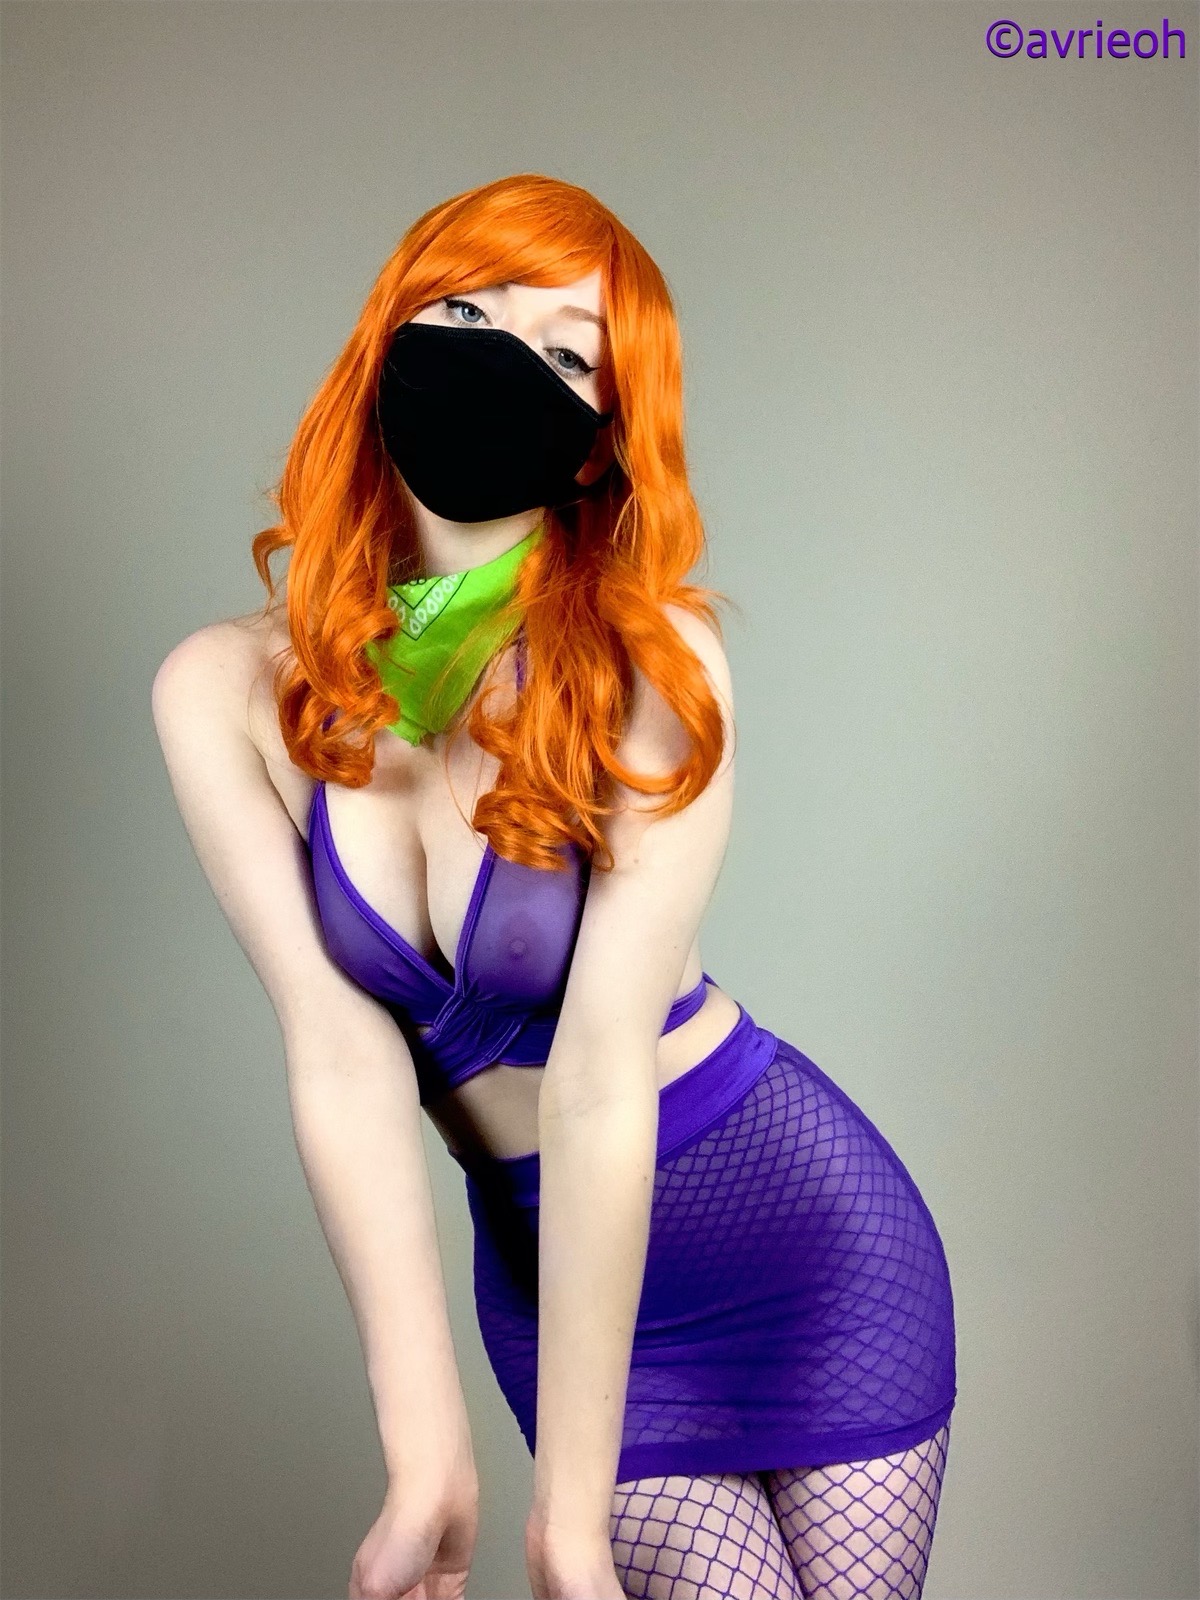 Boudoir Daphne Blake From Scooby Doo By AvrieOh